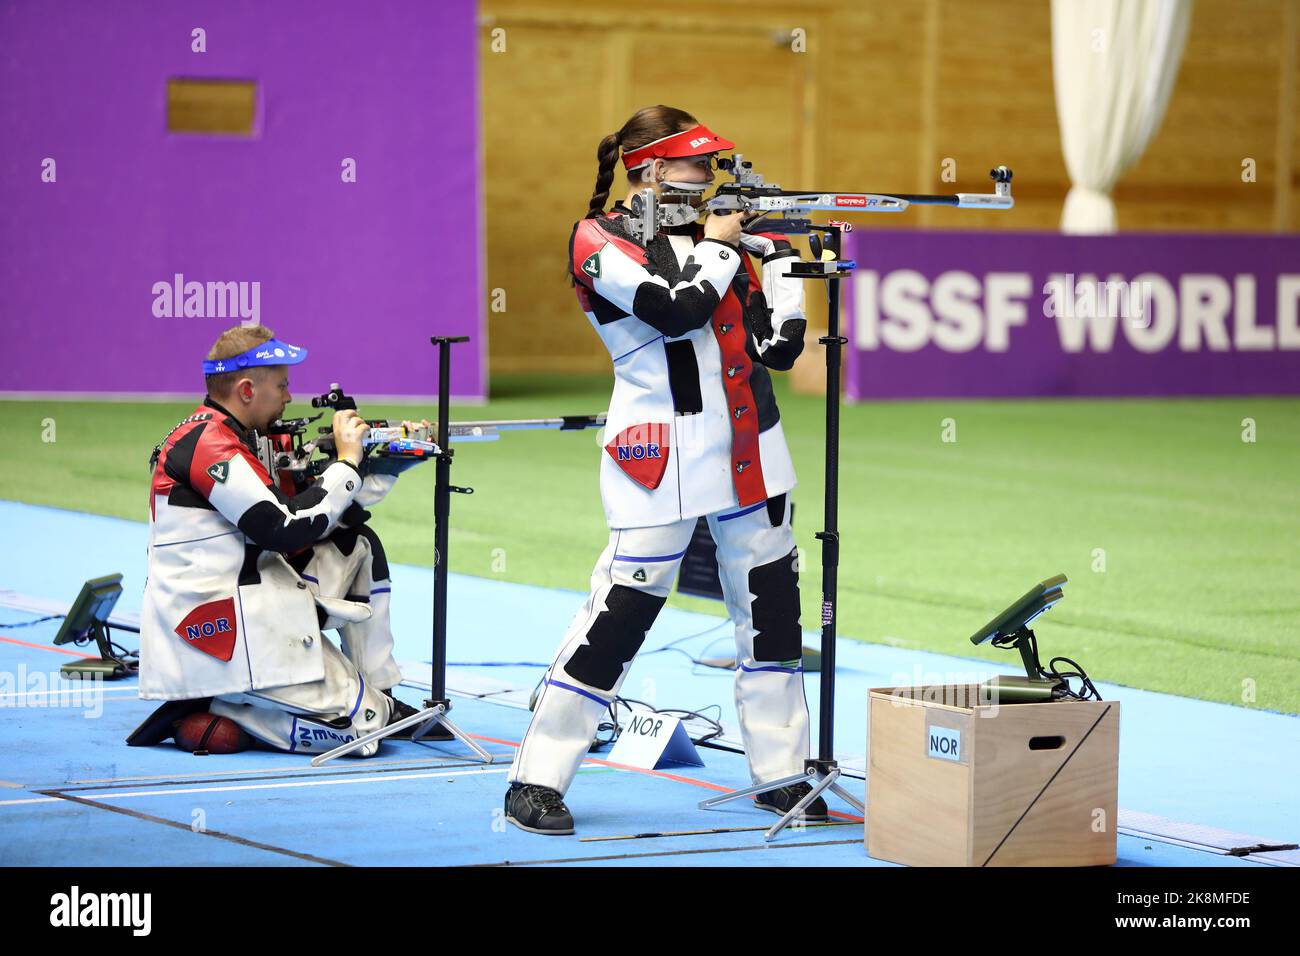 Cairo, Egypt. 24th Oct, 2022. Jenny Stene (R)/Simon Claussen of Norway compete during the 50m rifle 3 positions mixed team gold medal match against Stephanie Laura Scurrah Grundsoee/Steffen Olsen of Denmark at the ISSF World Championship Rifle/Pistol in Cairo, Egypt, Oct. 24, 2022. Credit: Ahmed Gomaa/Xinhua/Alamy Live News Stock Photo